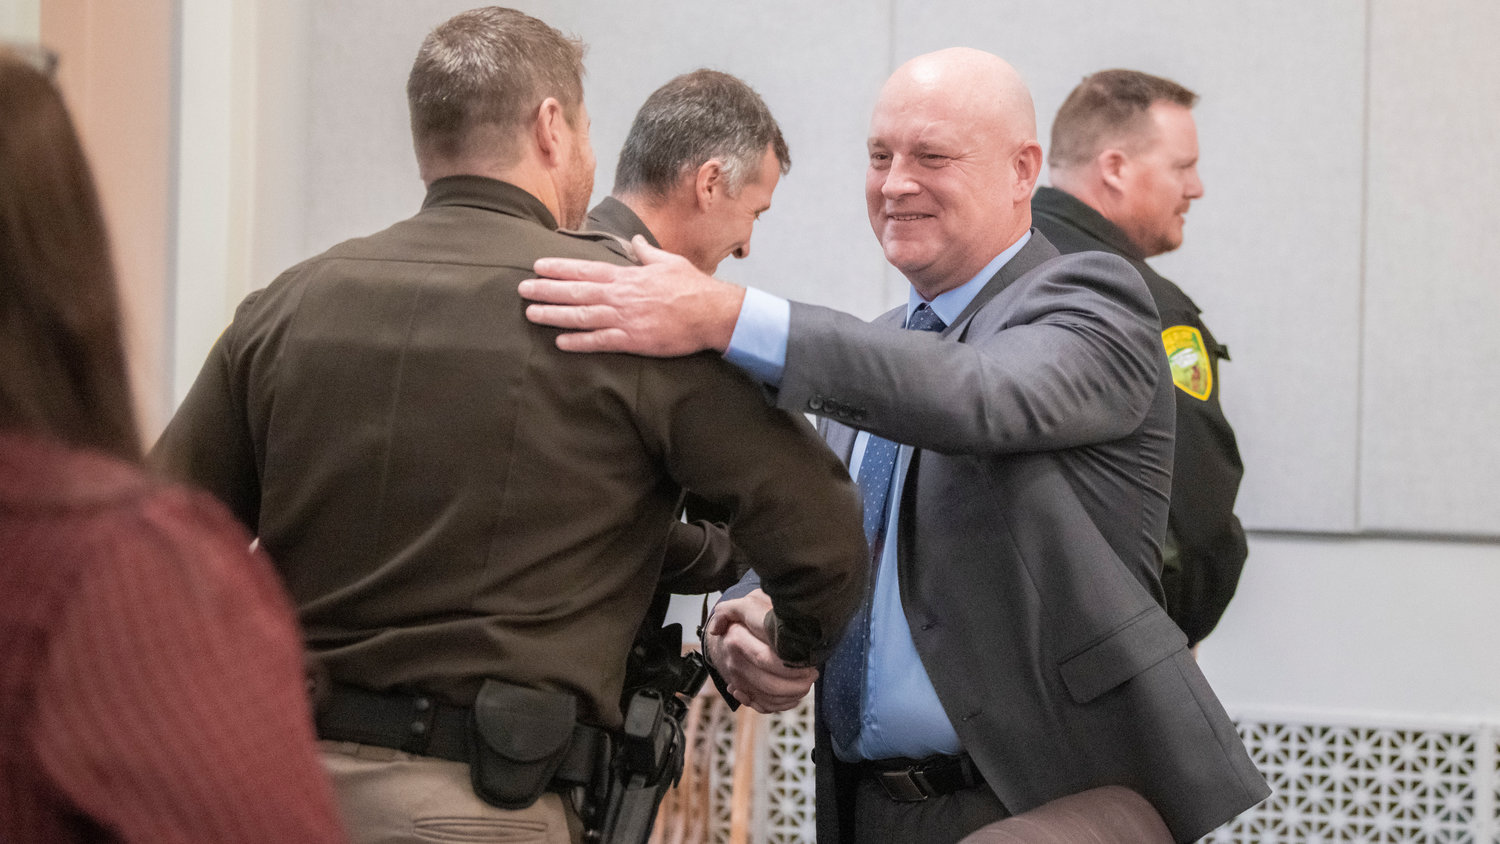 Scott Brummer smiles and greets deputies after being sworn in as the Lewis County District 3 commissioner Wednesday morning in Chehalis.